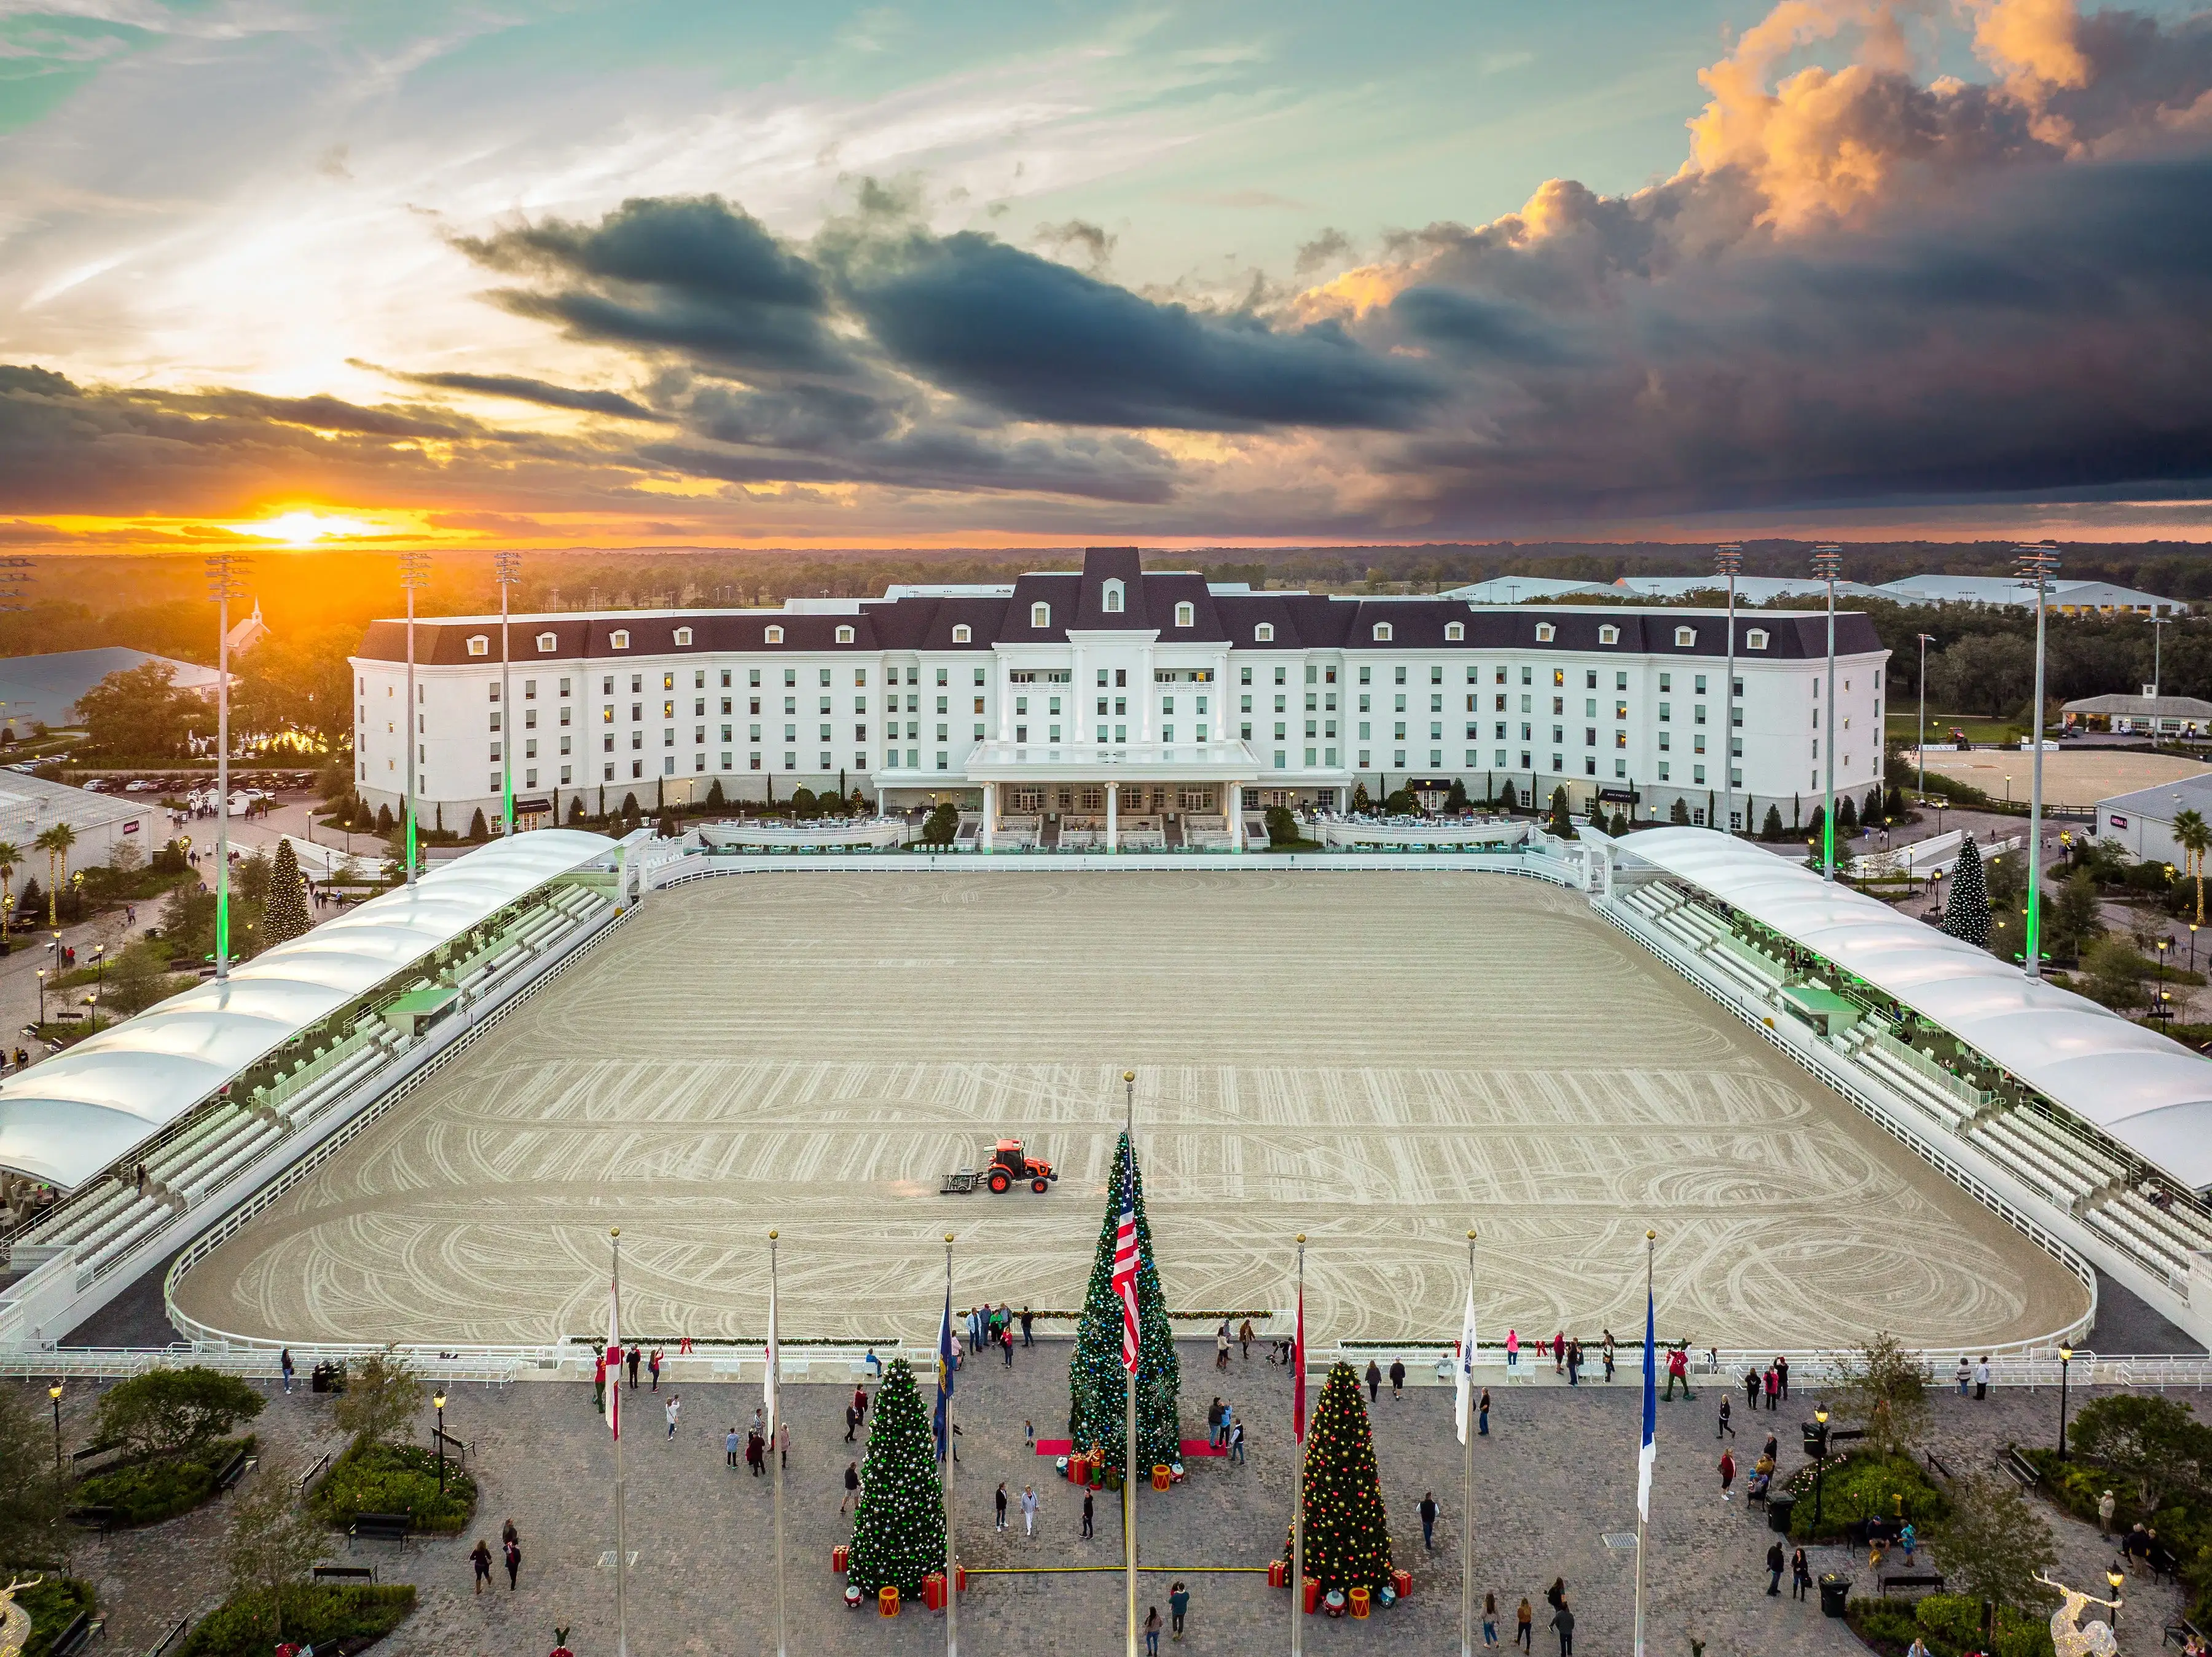 World Equestrian Center aerial view of outdoor arena